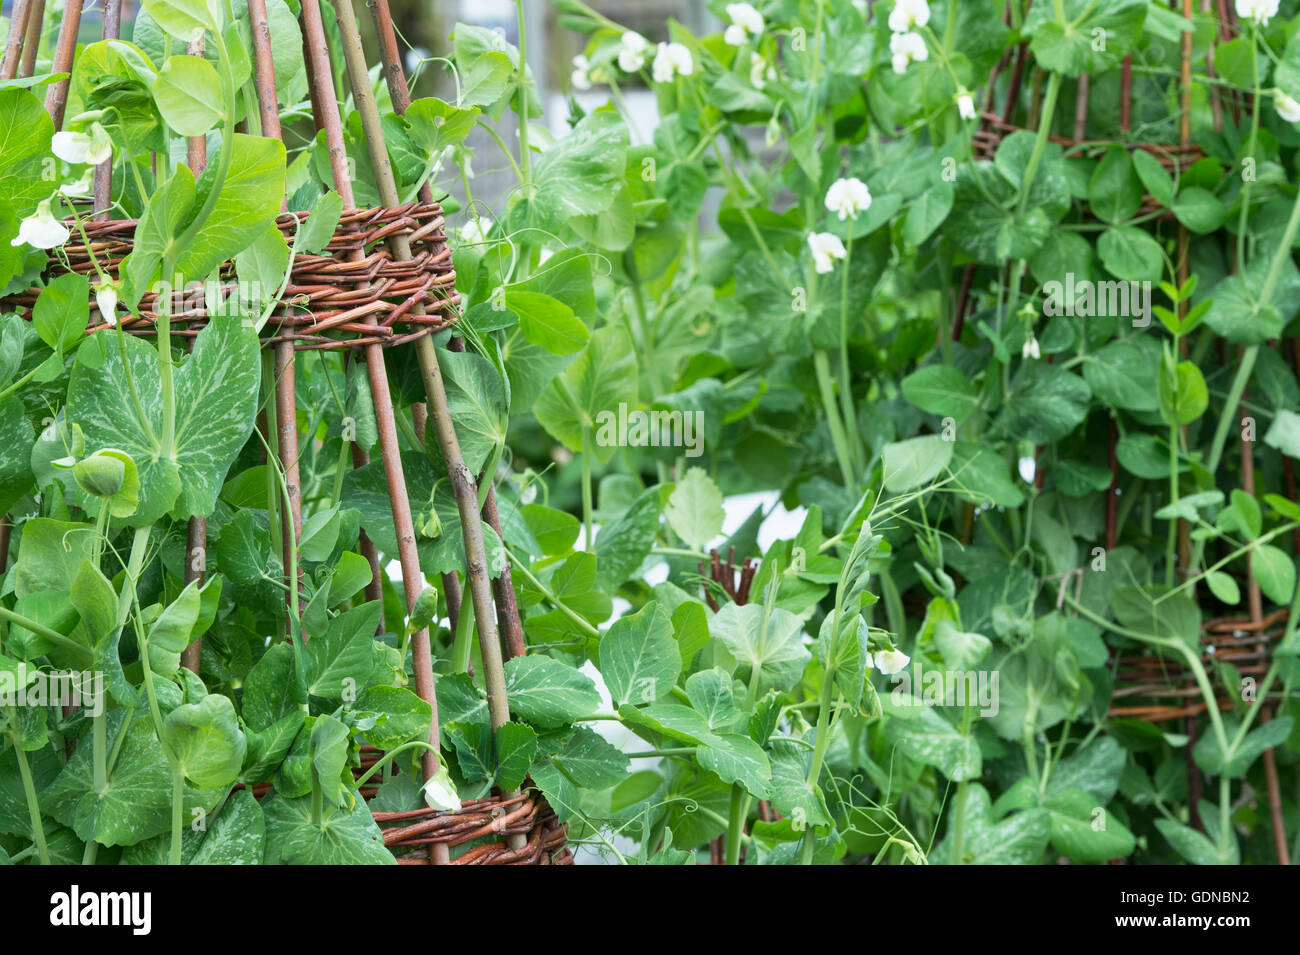 Pisum sativum. Pea 'lord leicester' on a wigwam willow stick support in a vegetable garden Stock Photo